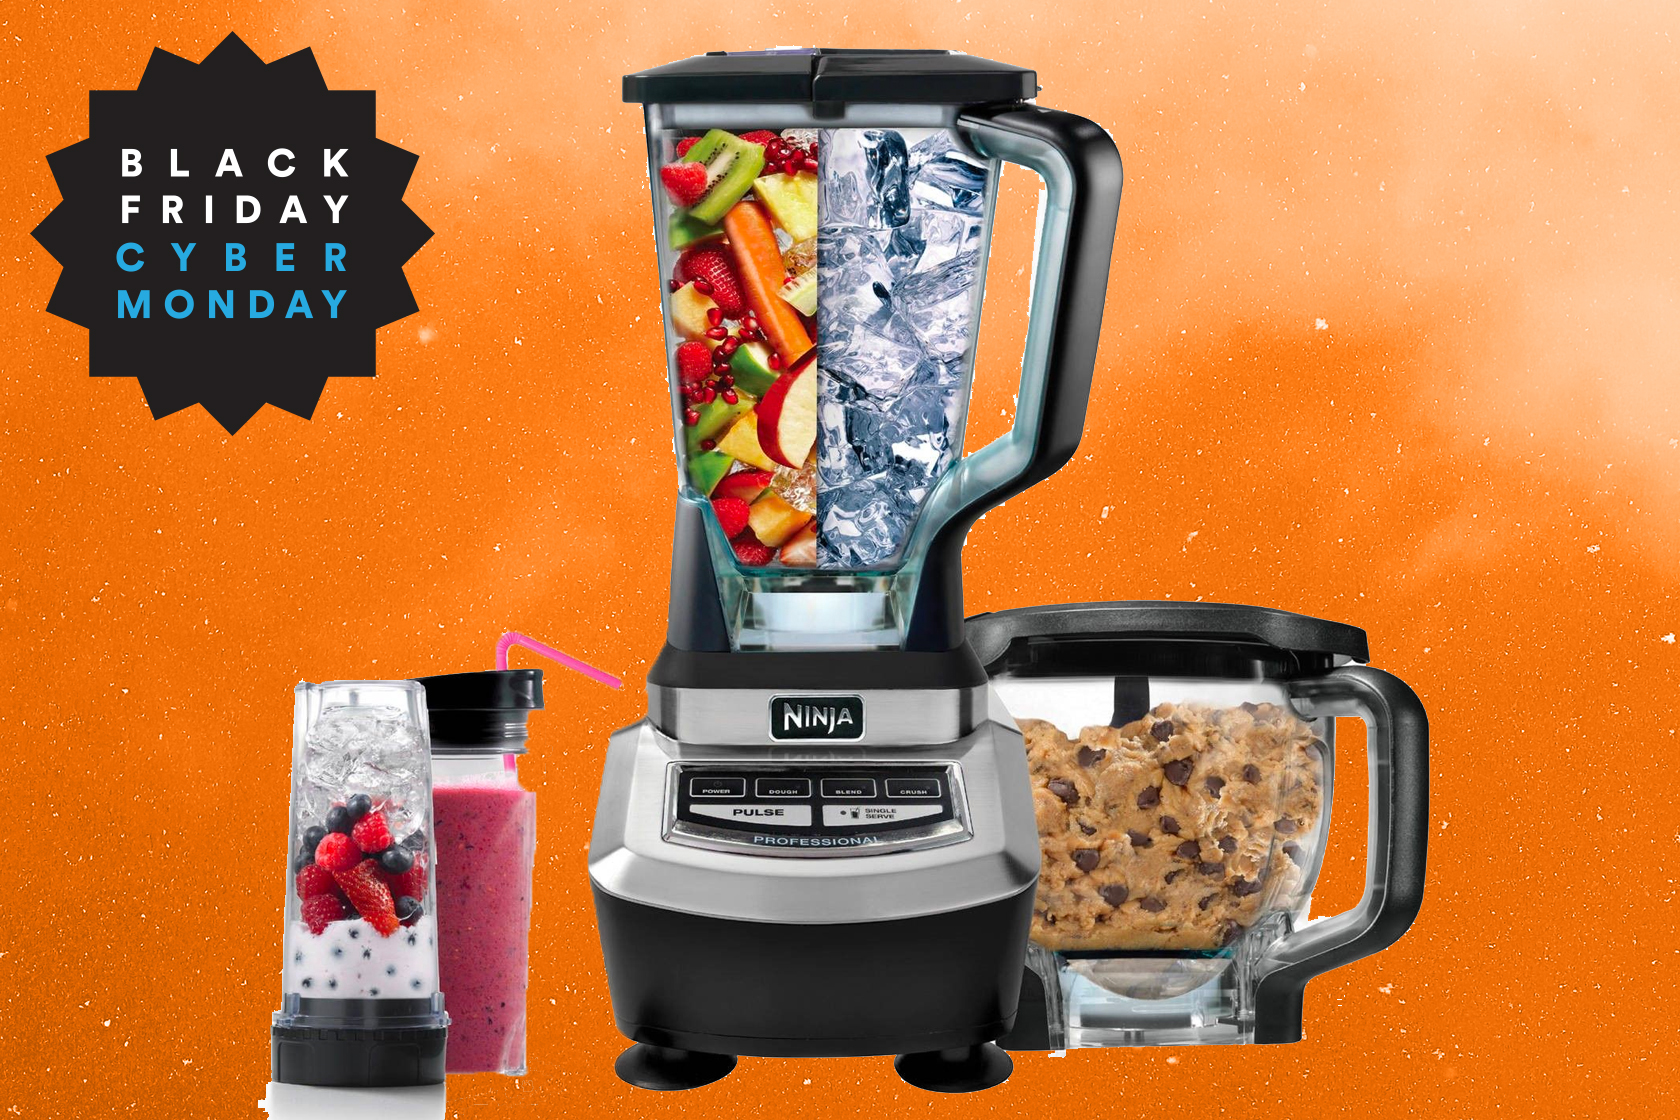 Walmart has a Ninja Supra Kitchen System for $99 for Cyber Monday